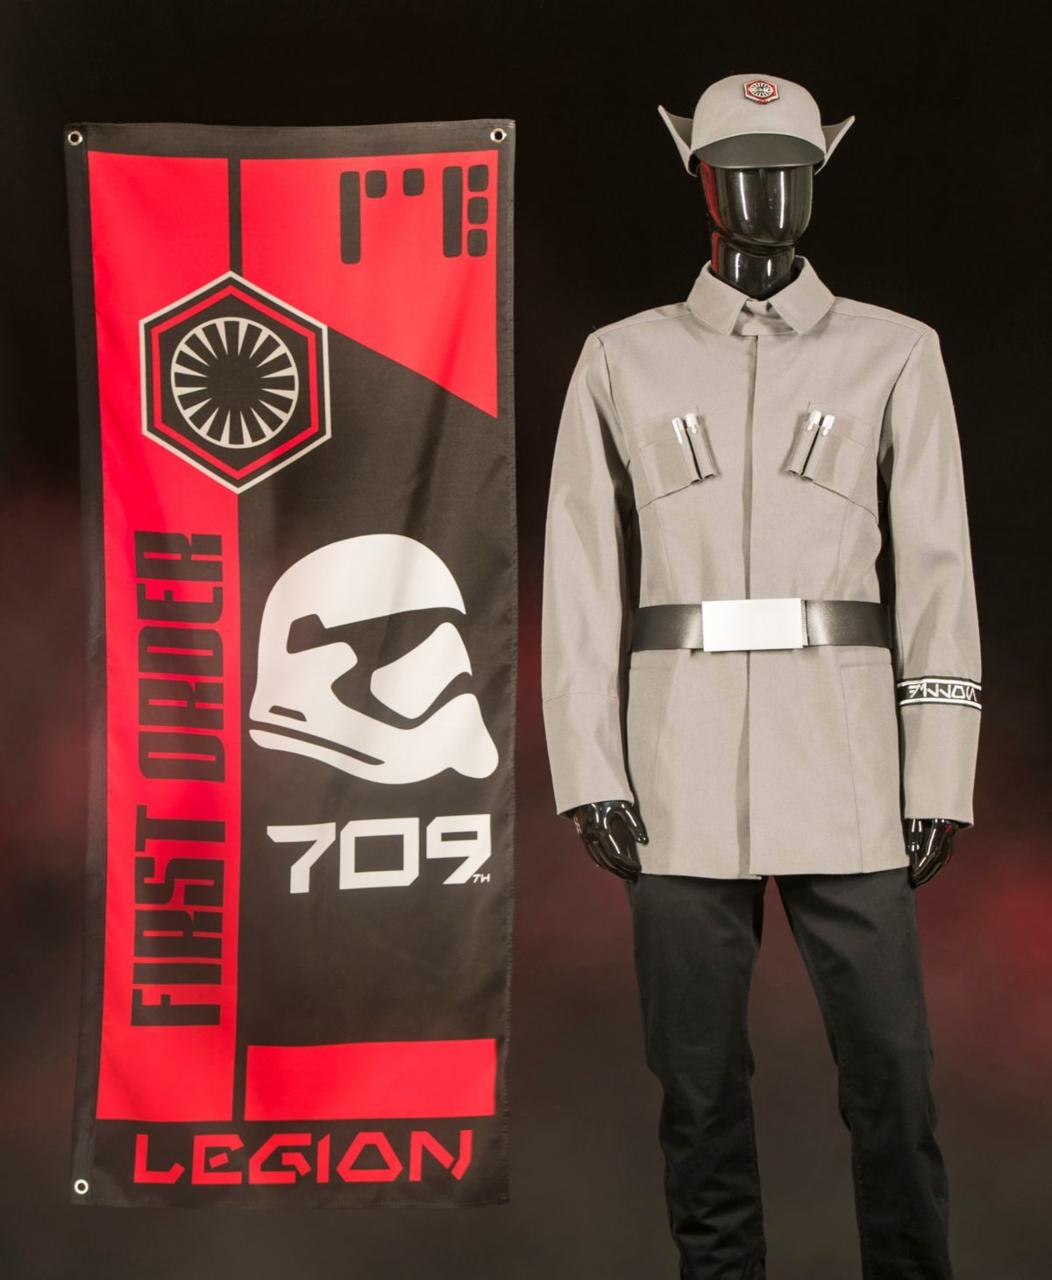 22. First Order officer costume